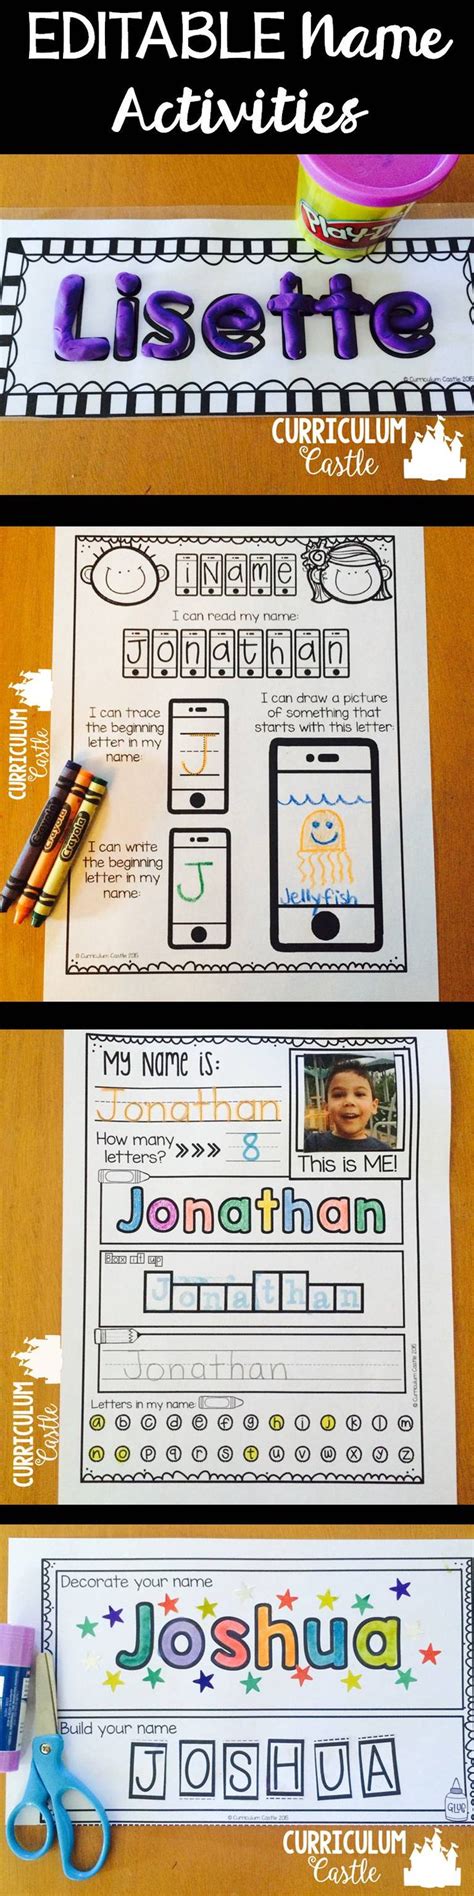 Editable Name Activities That You Can Customize To Your Students Names